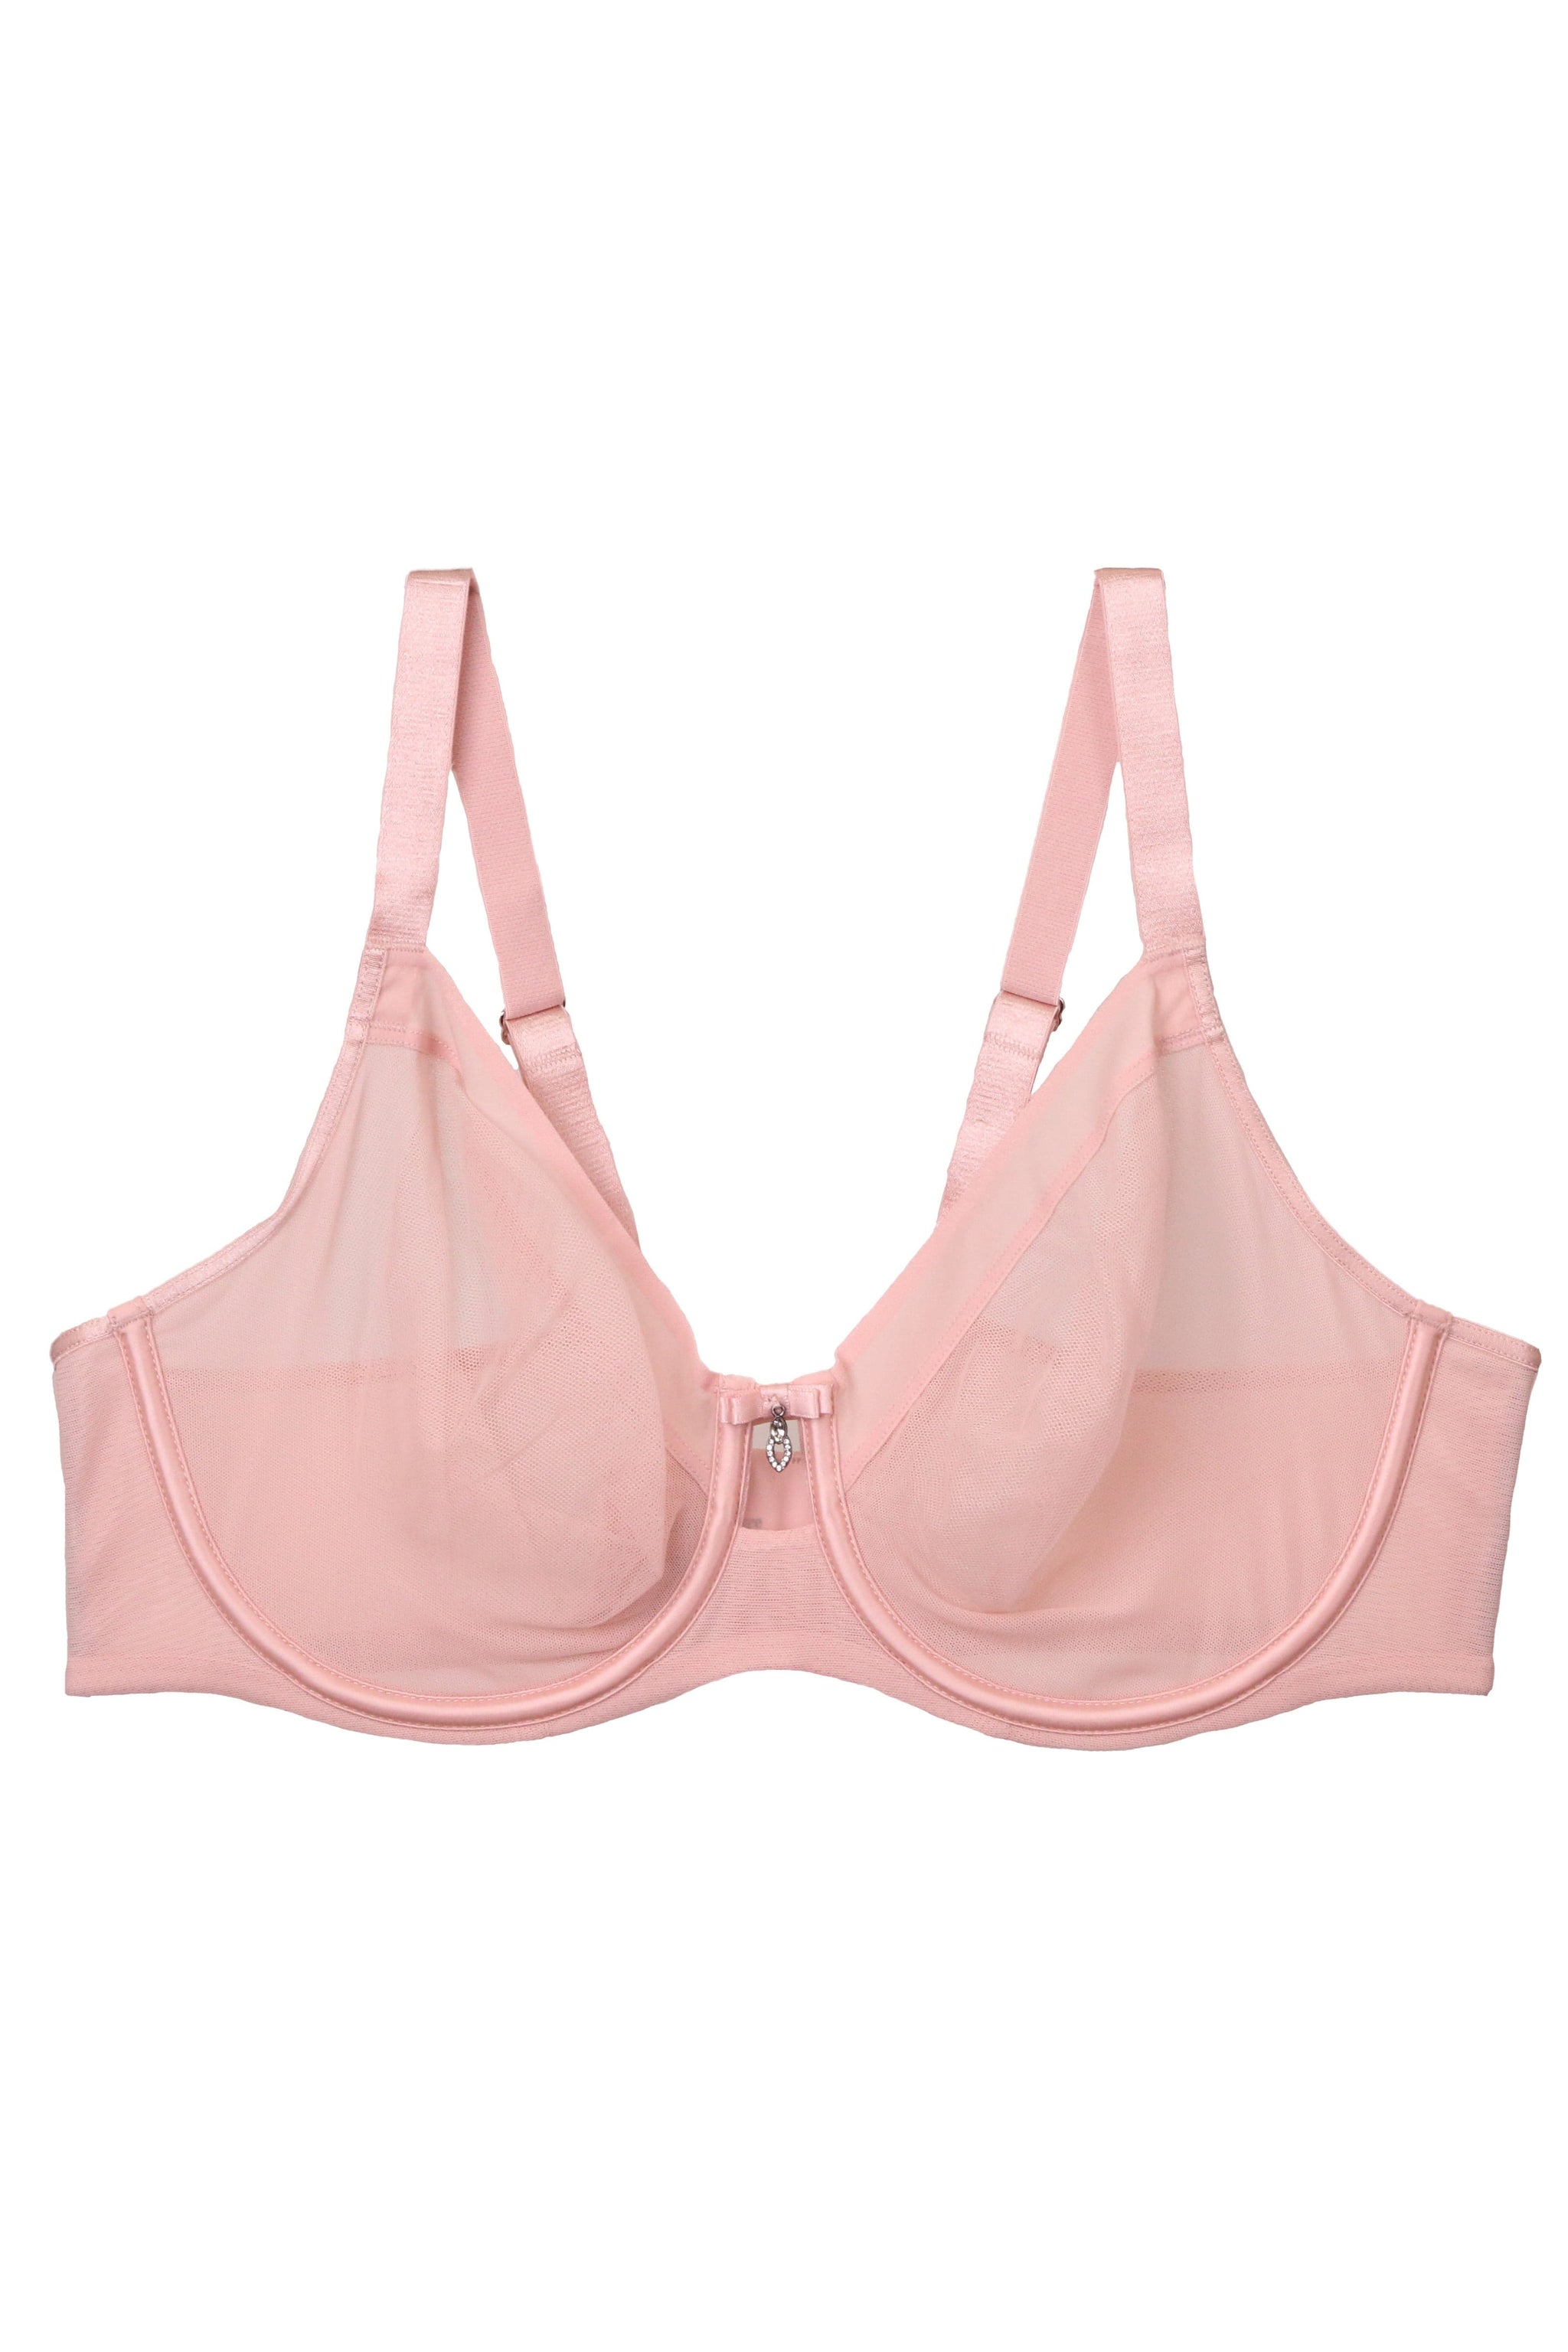 See through bra - The best products with free shipping